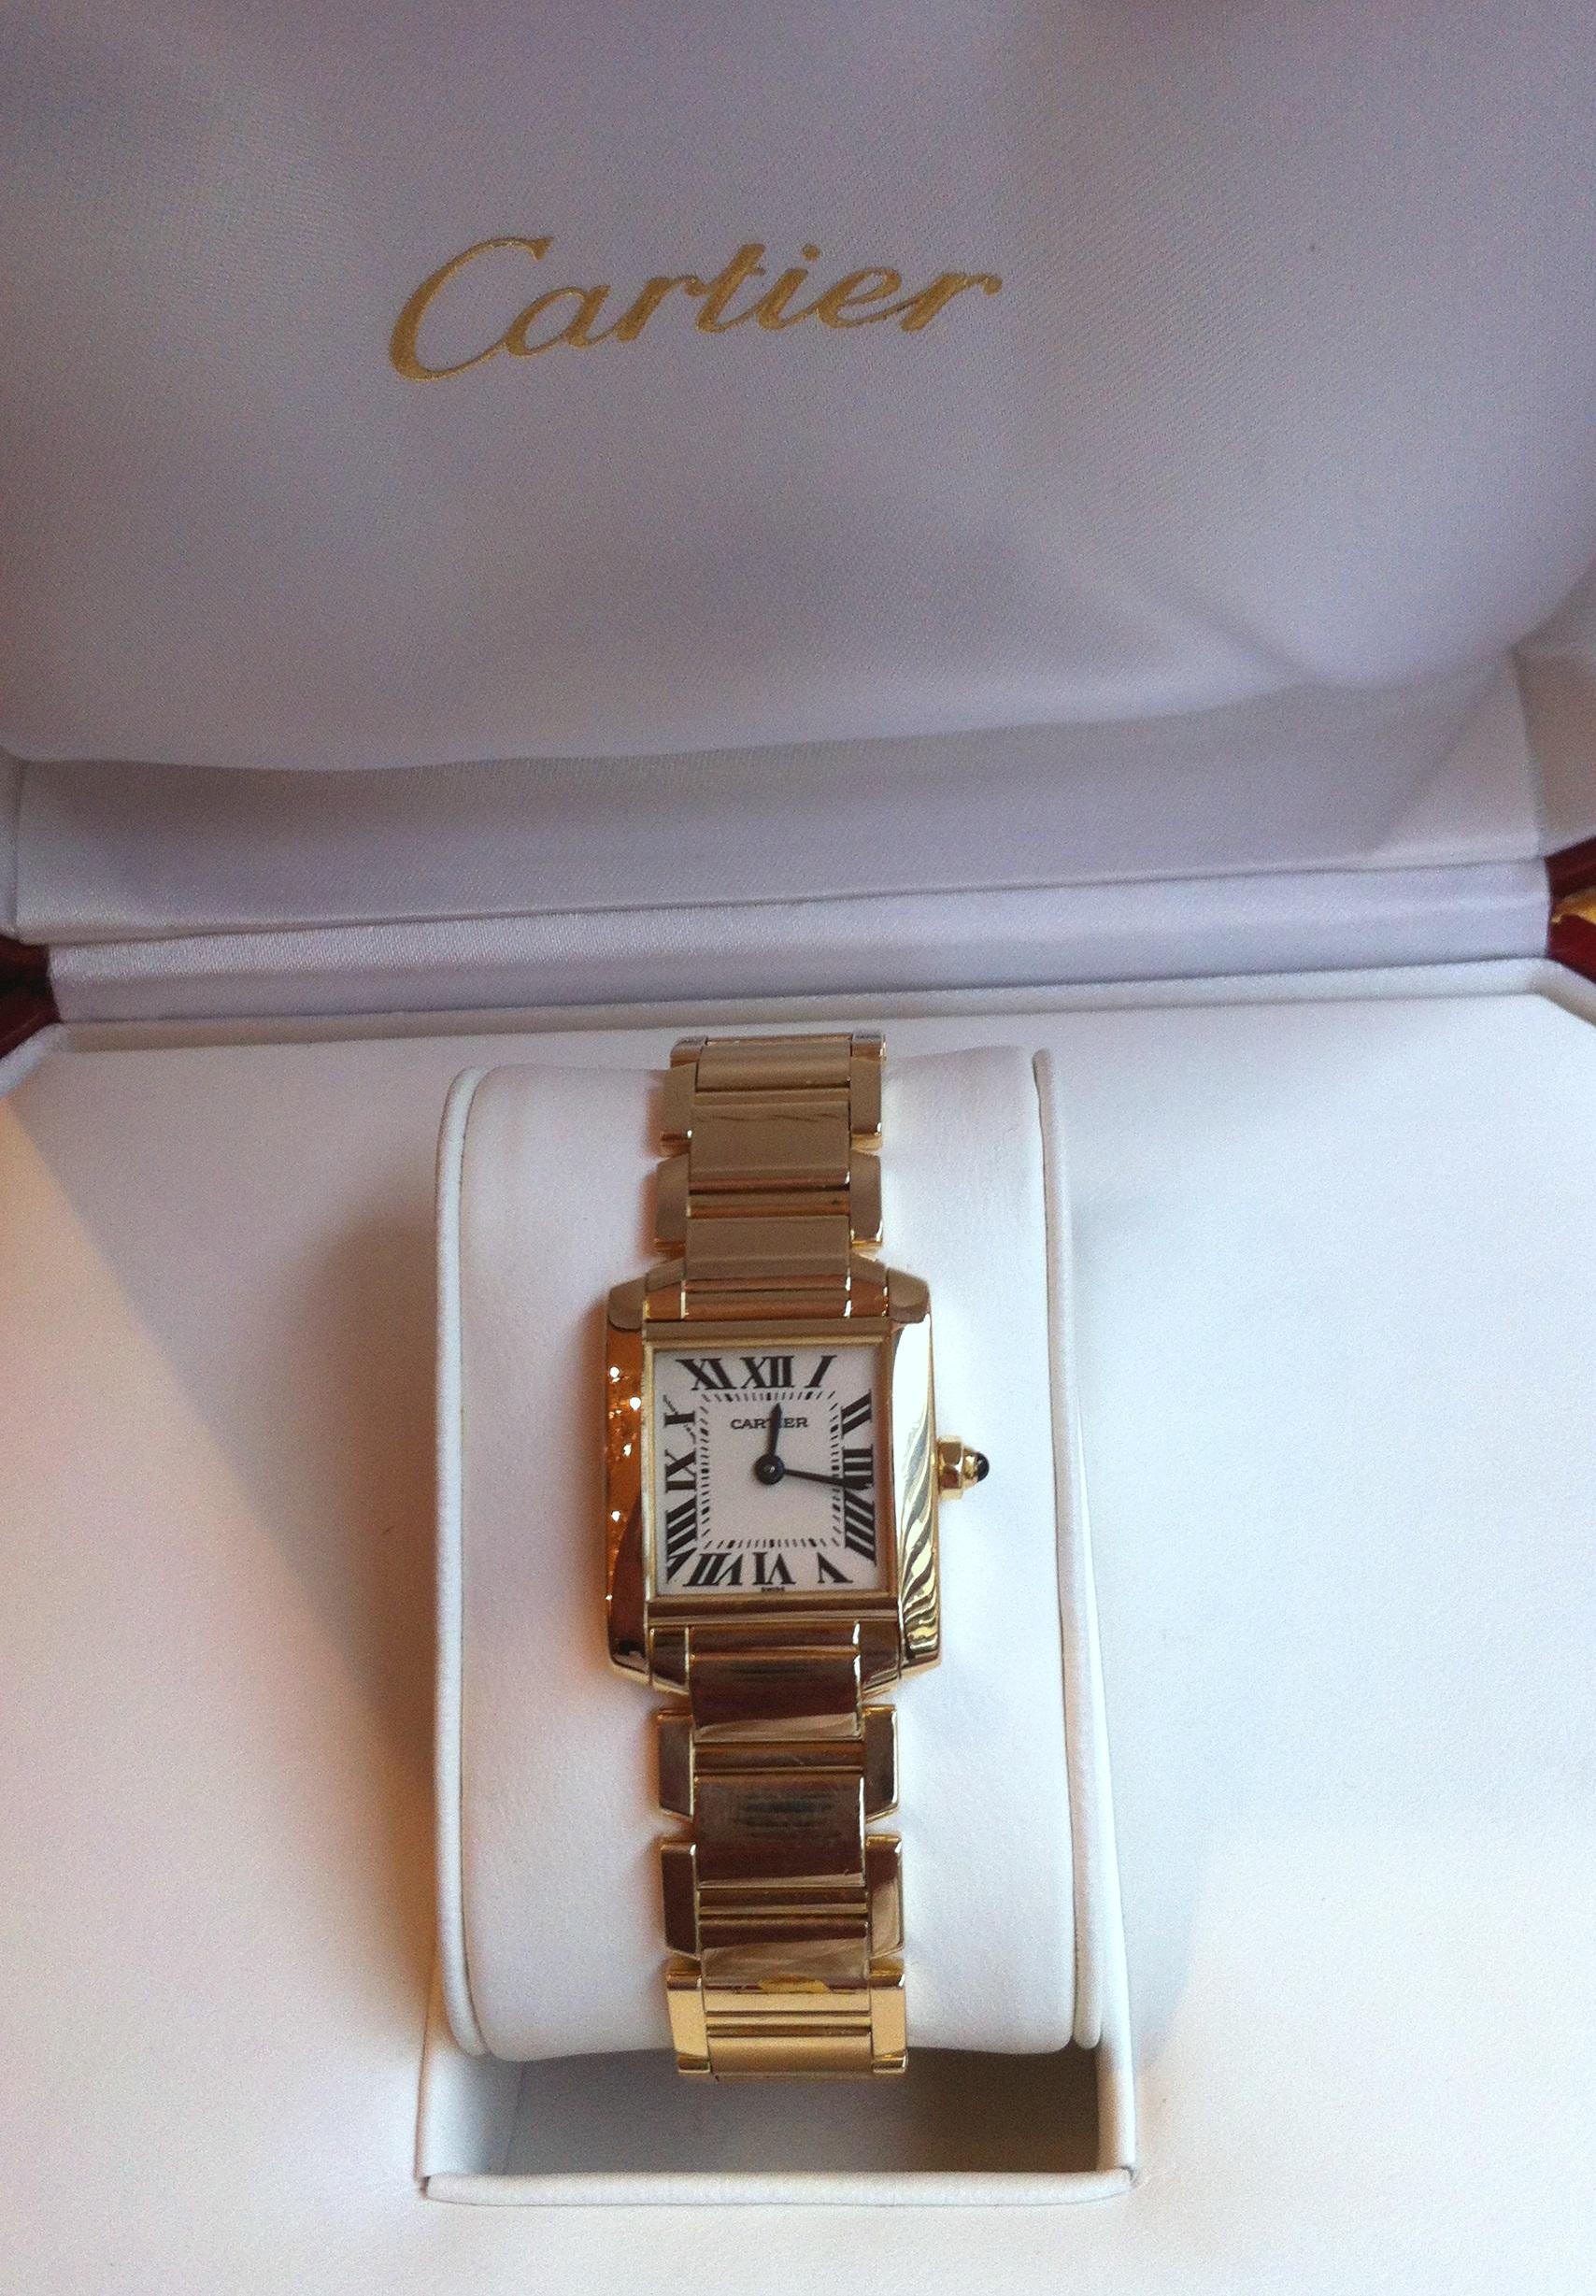 Cartier Lady Tank Française in 18K yellow gold, 750/1000eme

Quartz movement, Roman Dial.

Signed Cartier and numbered.

Within its original box !

Dimensions:  25 X 20 mm

Very good conditions ! Pre-owned watch in great condition keeping perfect